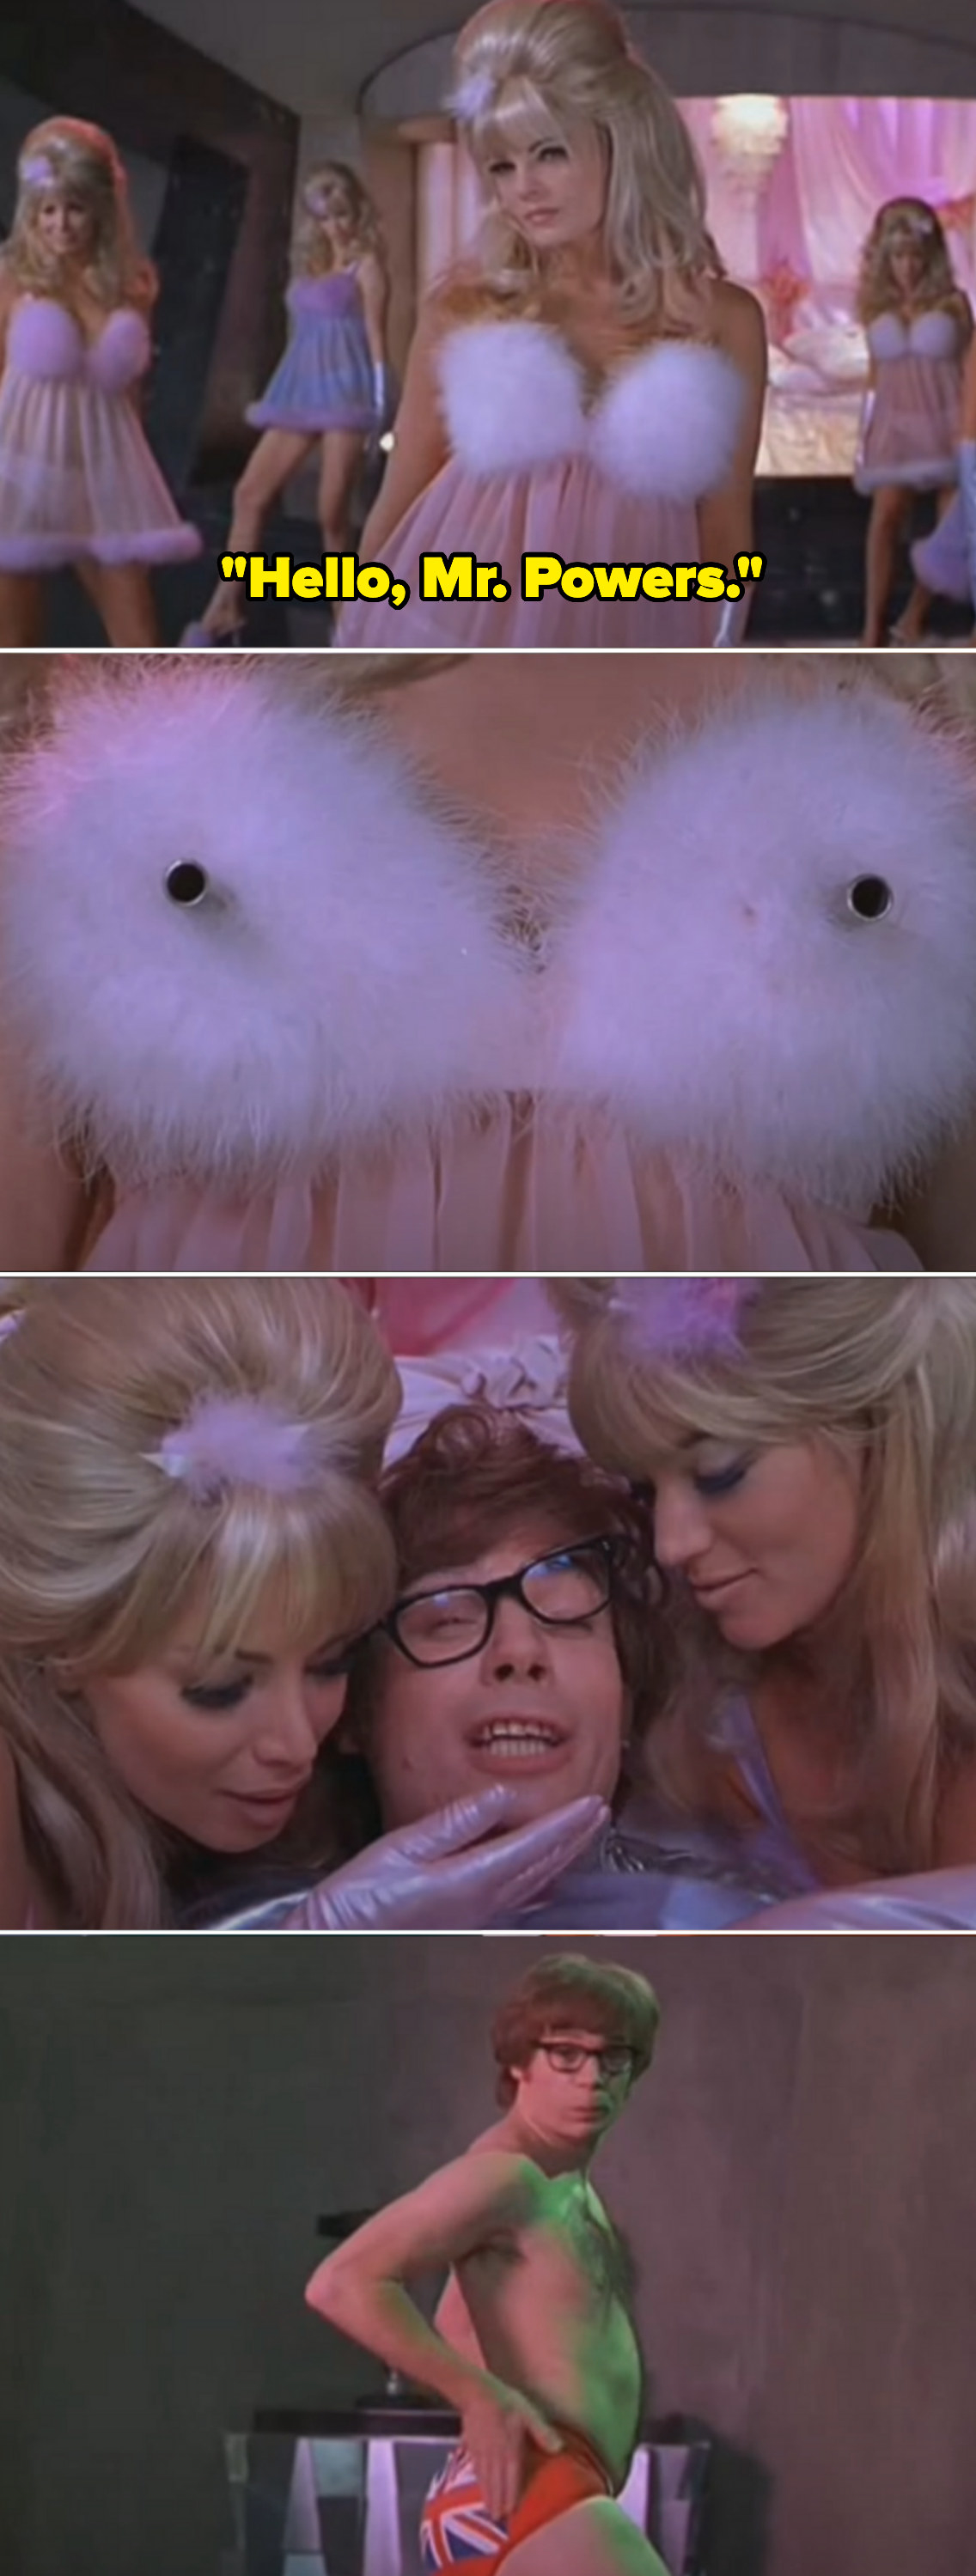 Austin Powers hangs out with sexy fembots